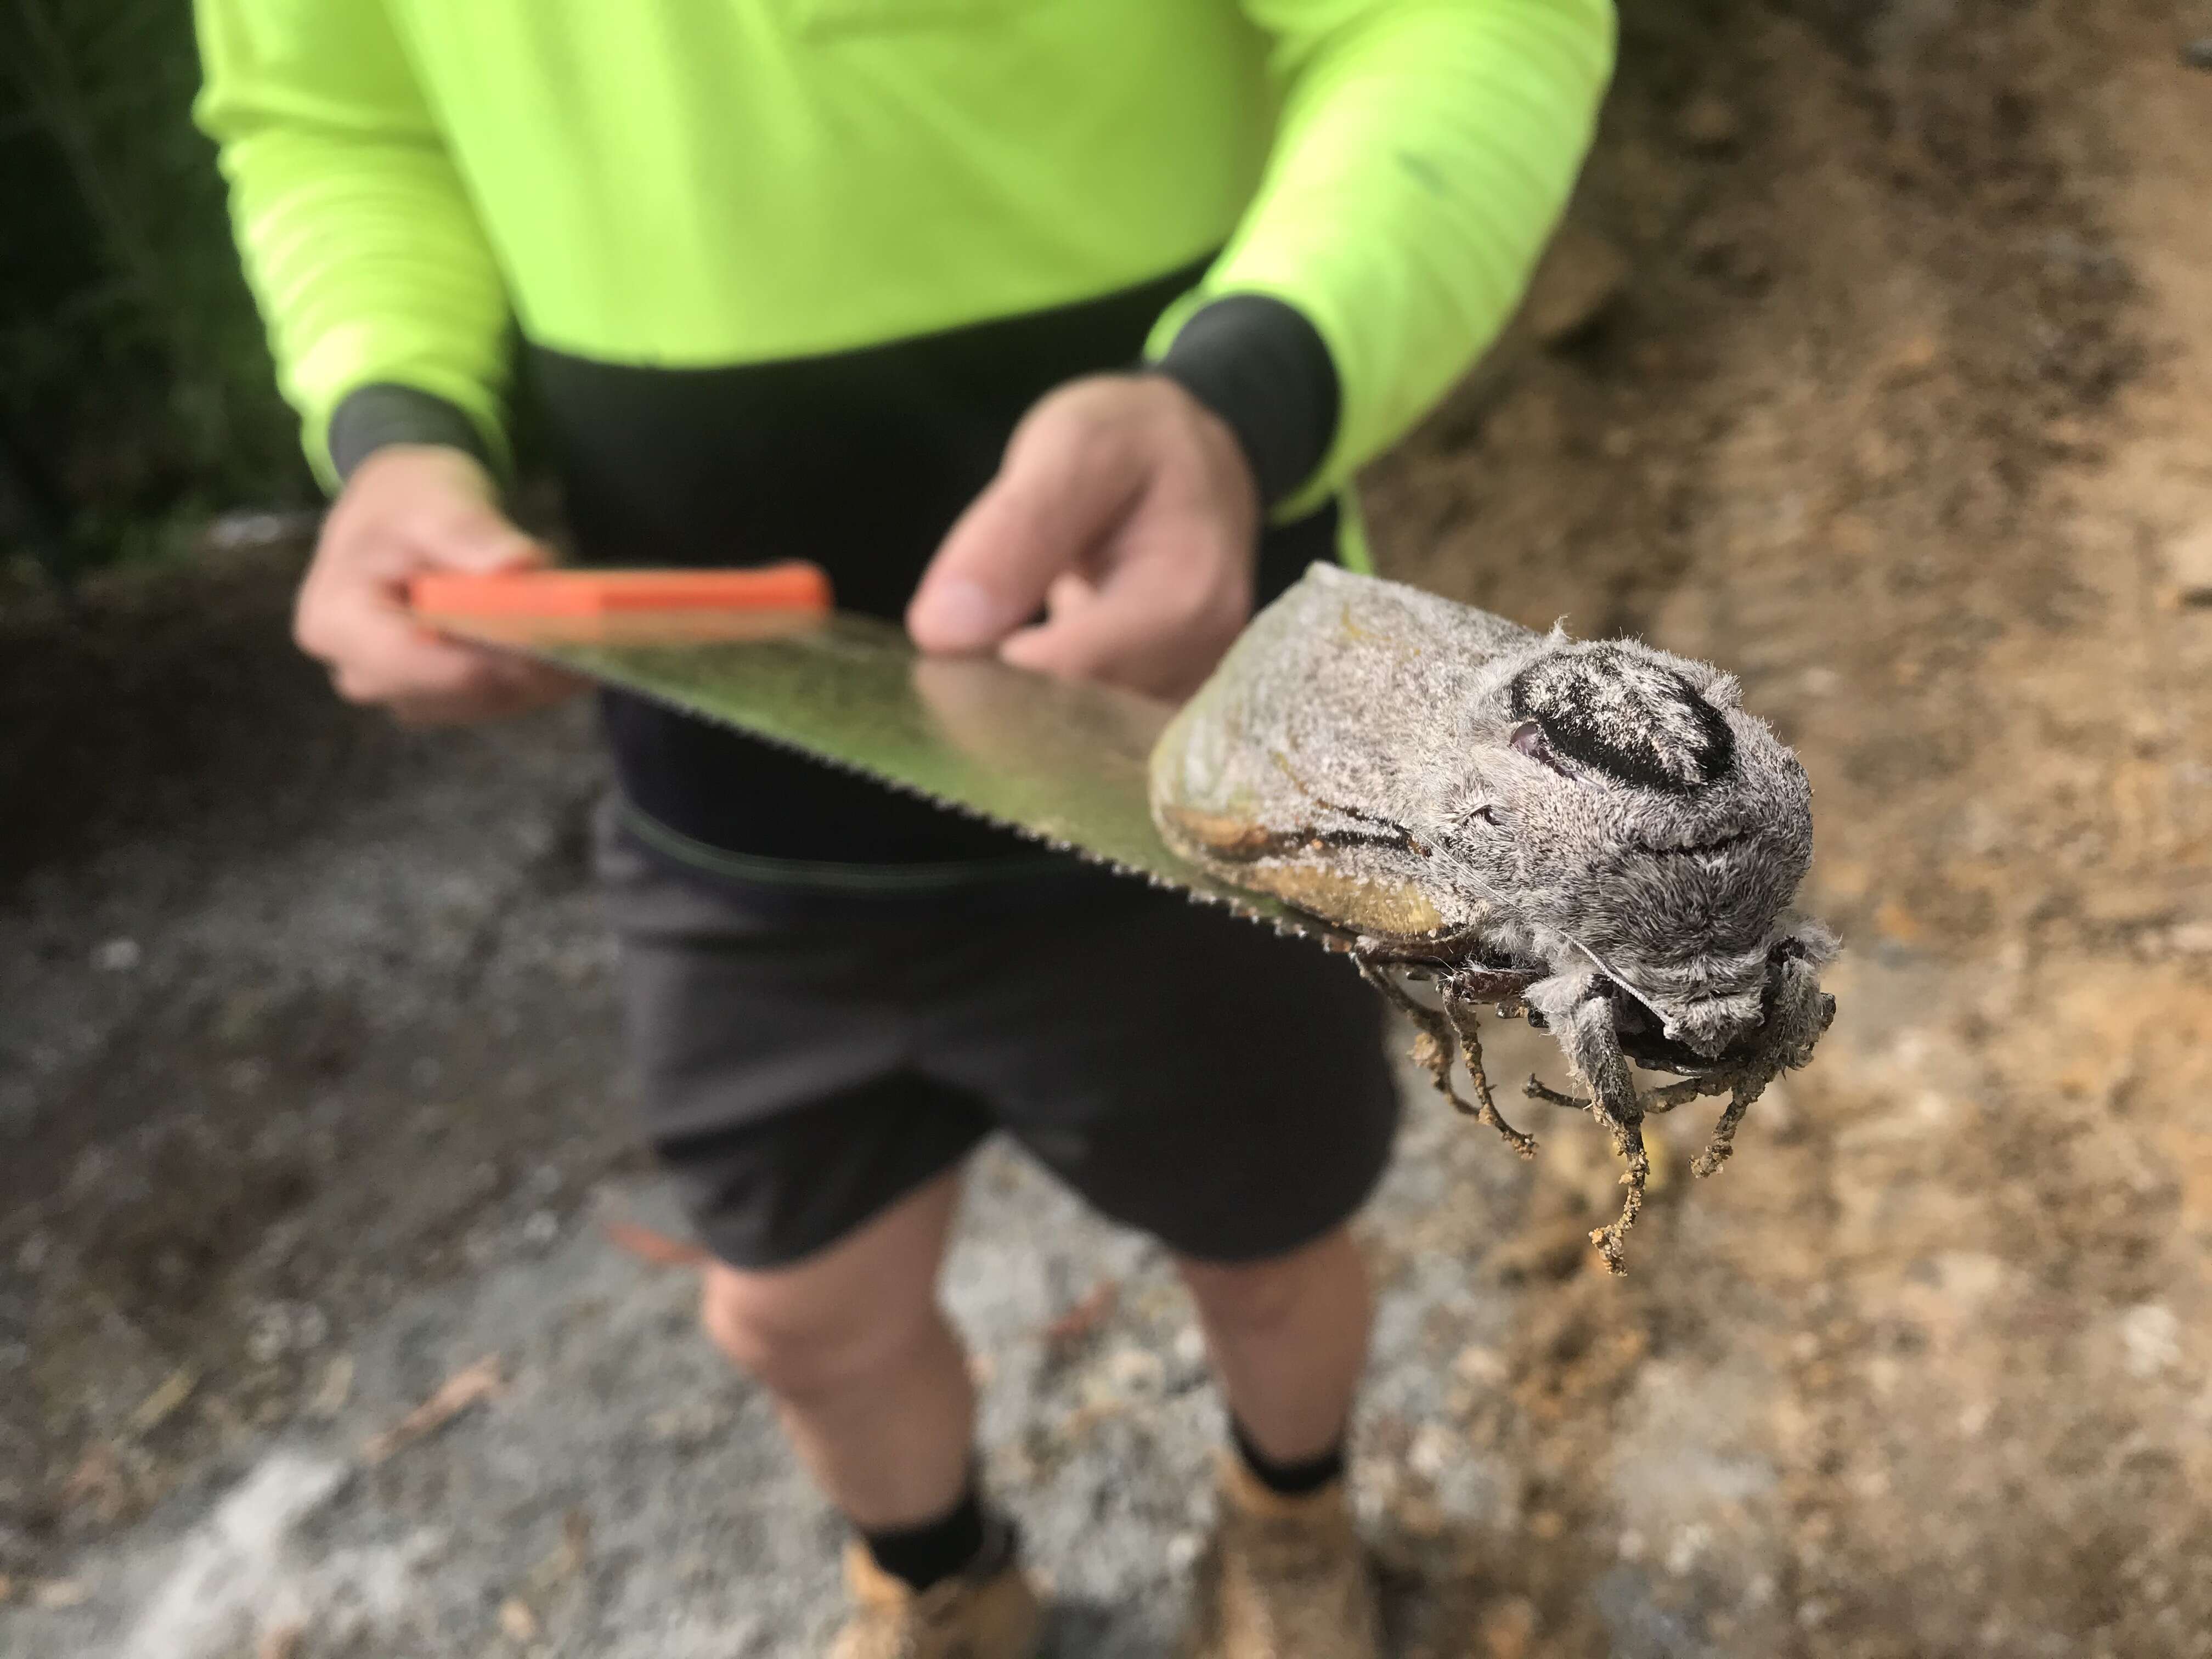 Construction workers find rat-sized moth